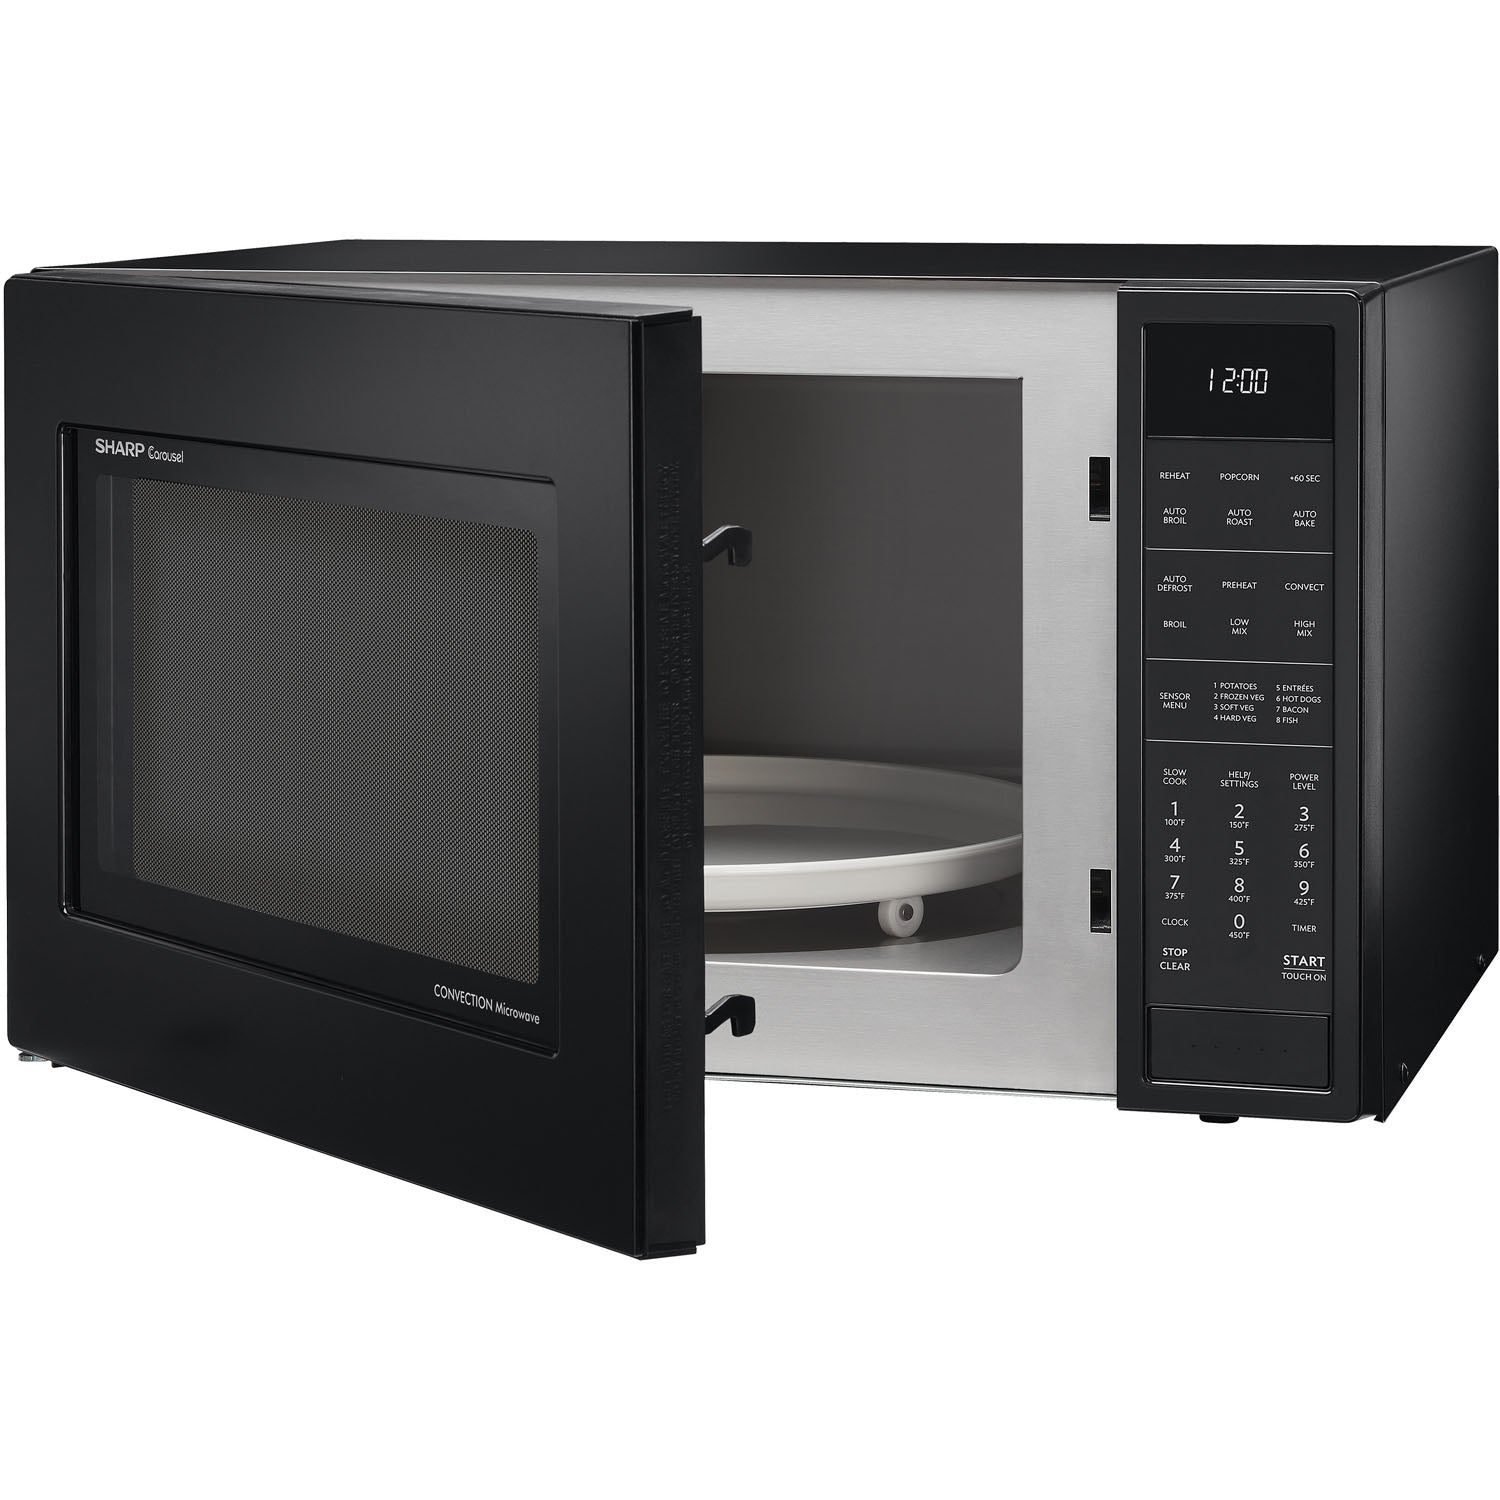 Sharp Carousel 1.4 cu. ft. 1100W 21 in. Countertop Microwave Oven in Black Stainless Steel (SMC1452CH)